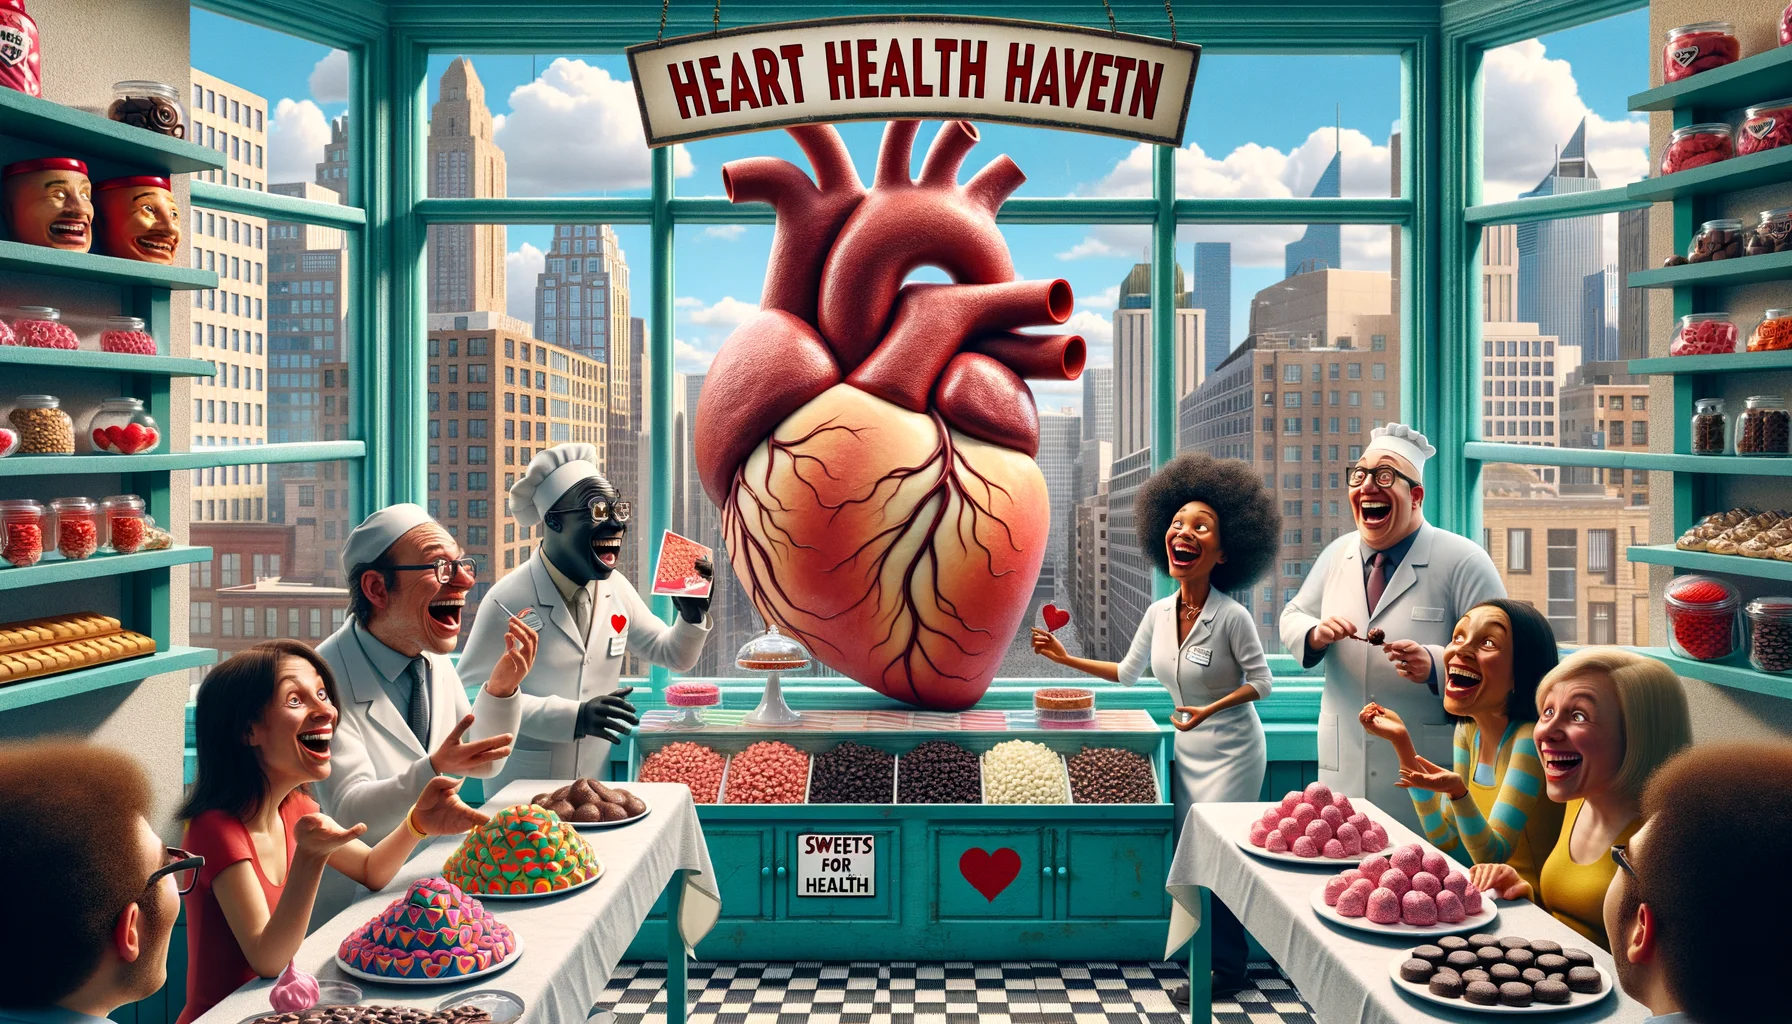 An unusual humorous scene of a real-life bakery nicknamed 'Heart Health Haven'. The bakery is filled with people of various descents and genders, laughing and amazed at an oversized artistic sculpture of a human heart made entirely from sugar-free, dark chocolate. On each side, there are shelves lined with colorful heart-shaped sweets. Bakery staff, consisting of a black female baker and a white male confectioner, are joyfully offering free samples of these heart-healthy sweets to the customers. A quirky sign overhead reads, 'Sweets for Heart Health'. Outside, through the shop window, a skyscraper cityscape, a sunny blue sky with fluffy white clouds can be seen.